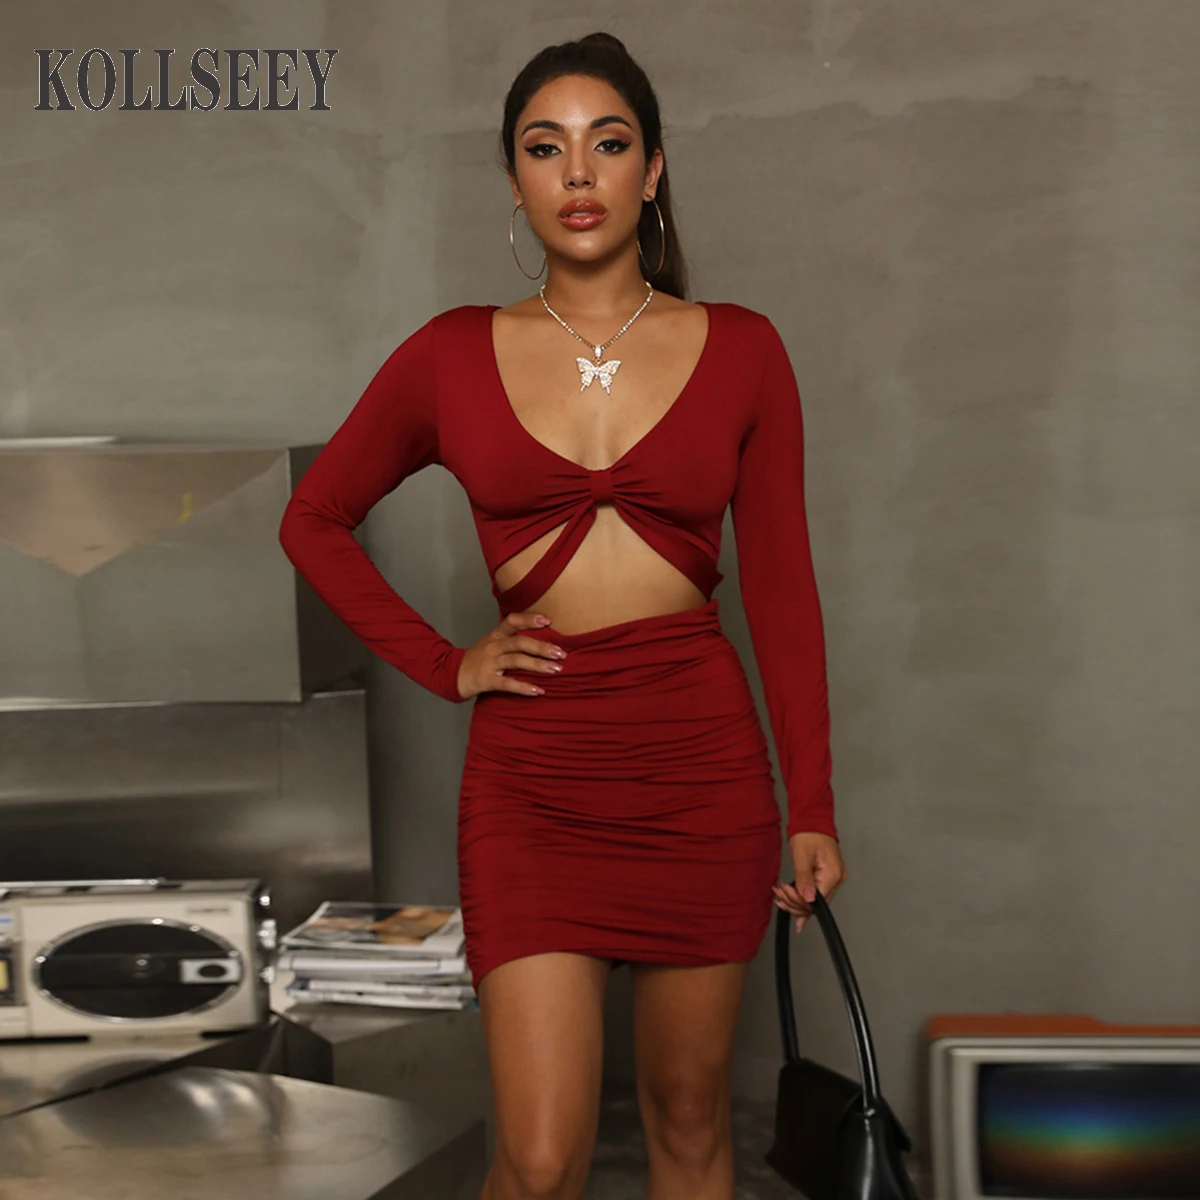 KOLLSEEY Brand Dresses 2022 Halter Neck Sexy Lace See Through Cut Out Backless Mini Dress enlarge